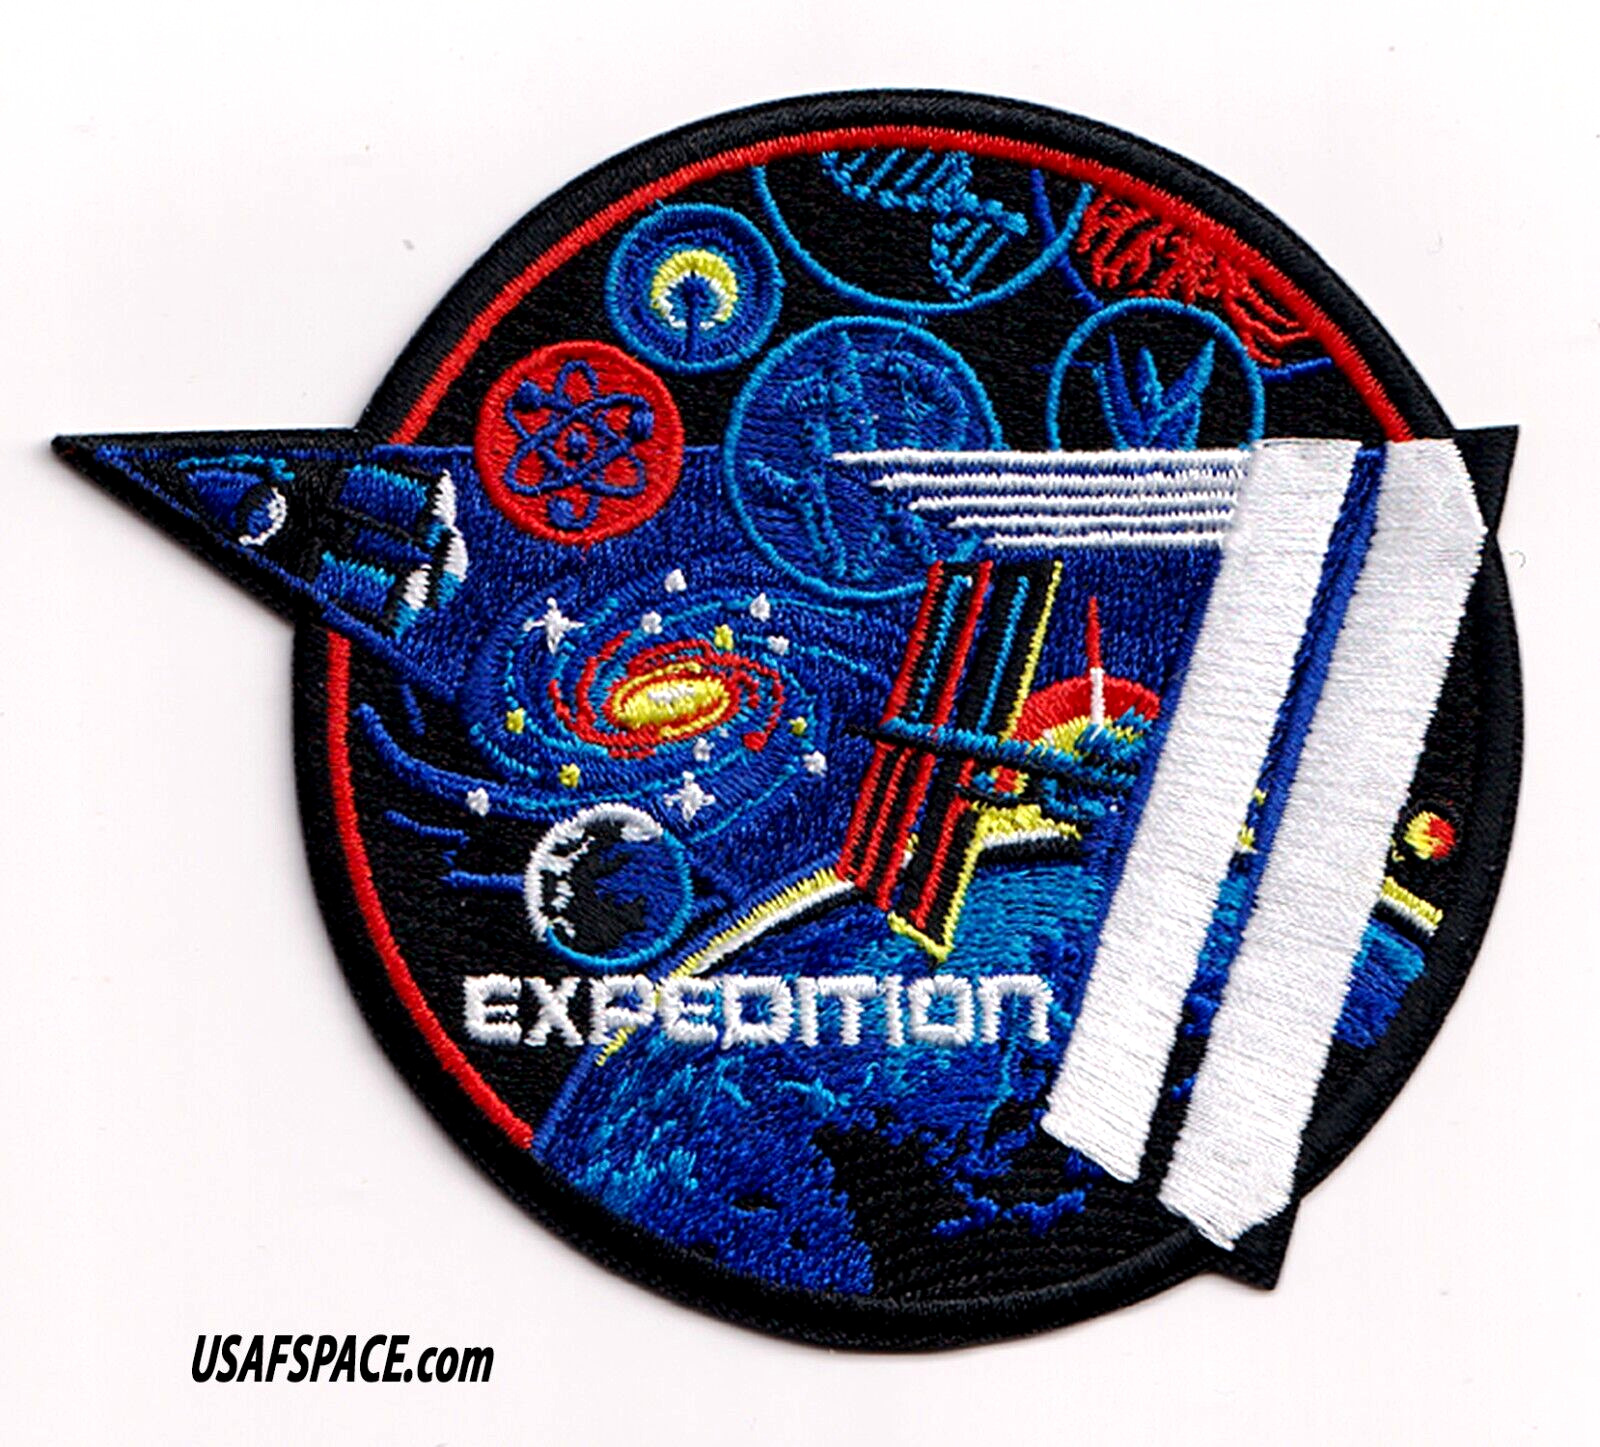 Authentic Expedition 71- NASA SPACEX ISS Mission- A-B Emblem USA SPACE PATCH